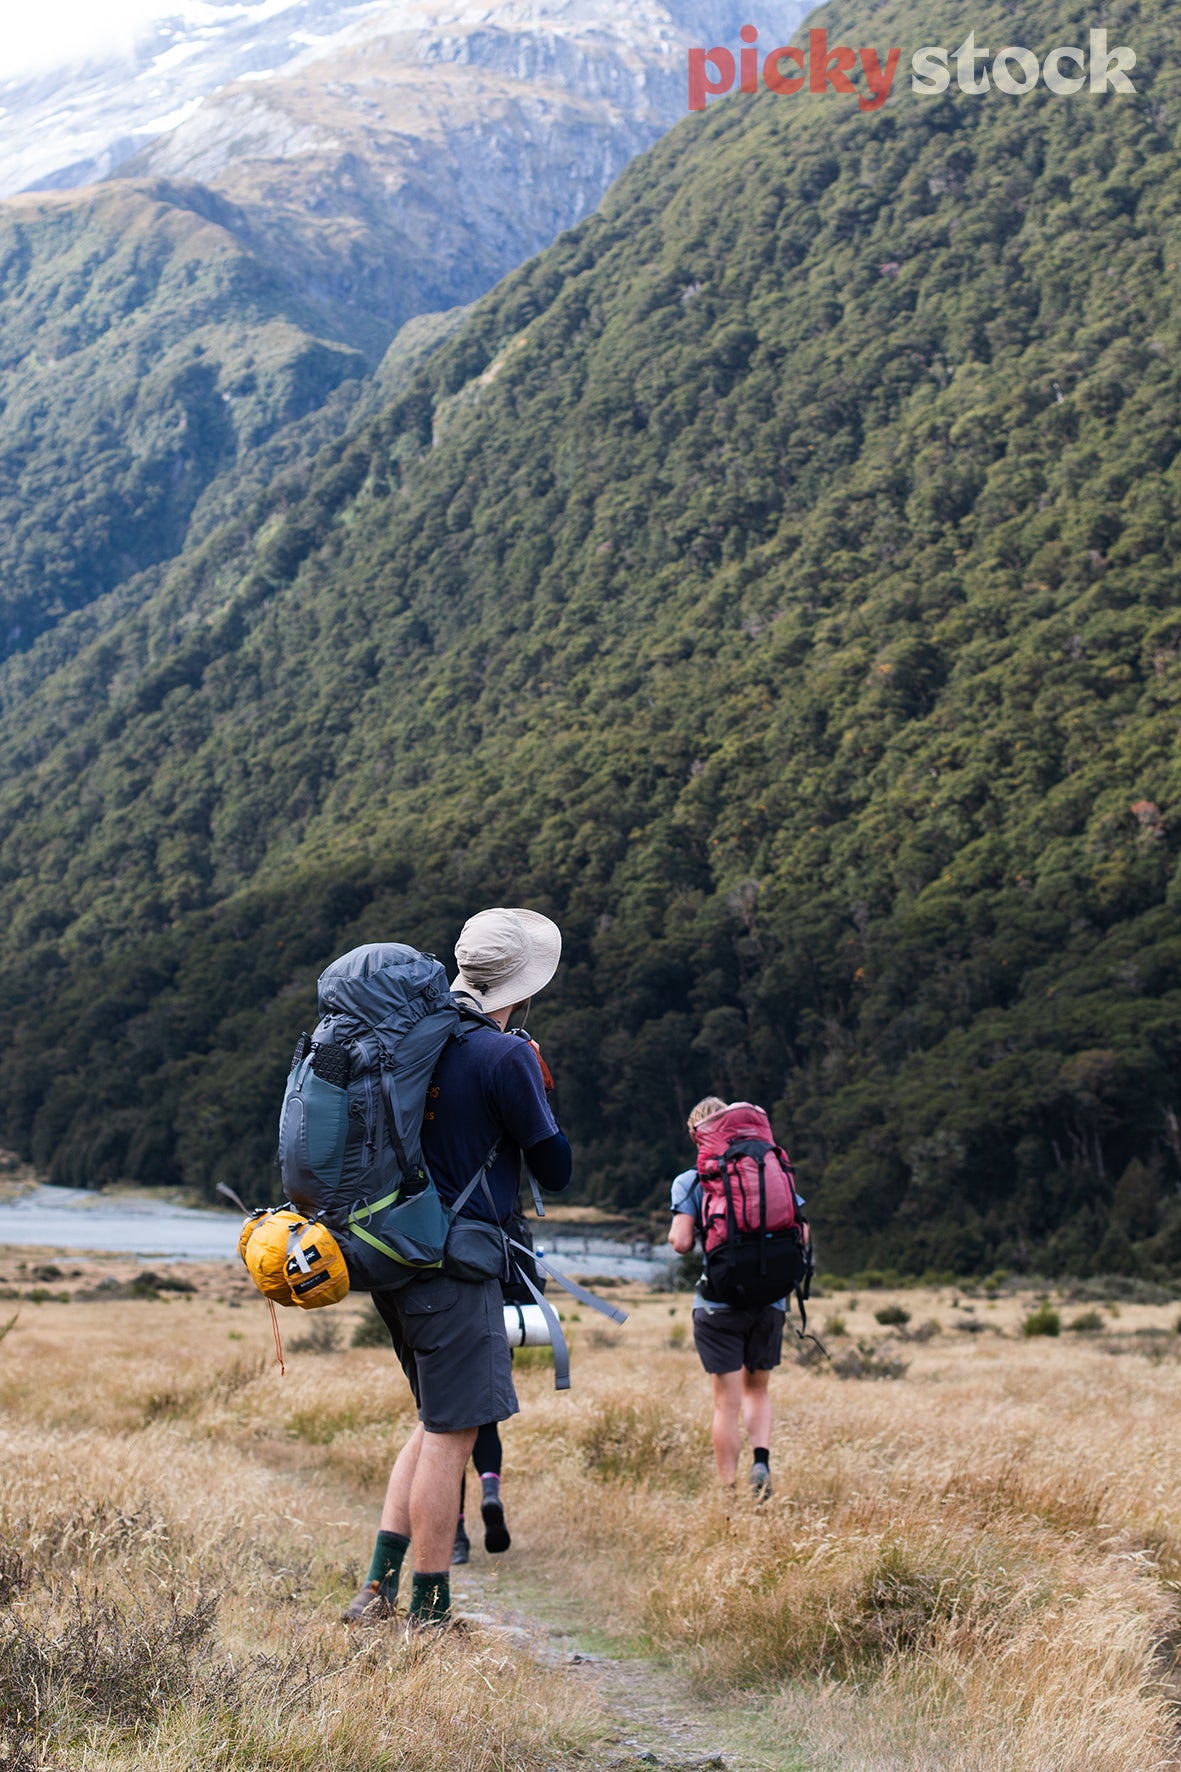 Close up of two friends walking hiking tramping through the valley of a National park in New Zealand. One Hiker closest to camera is wearing a grey bucket hat. Backpack is blue, with a yellow sleeping bag attached. They are walking through dry tussock mountain grass. You can see the river in the far background, with the large green dense mountain behind them.